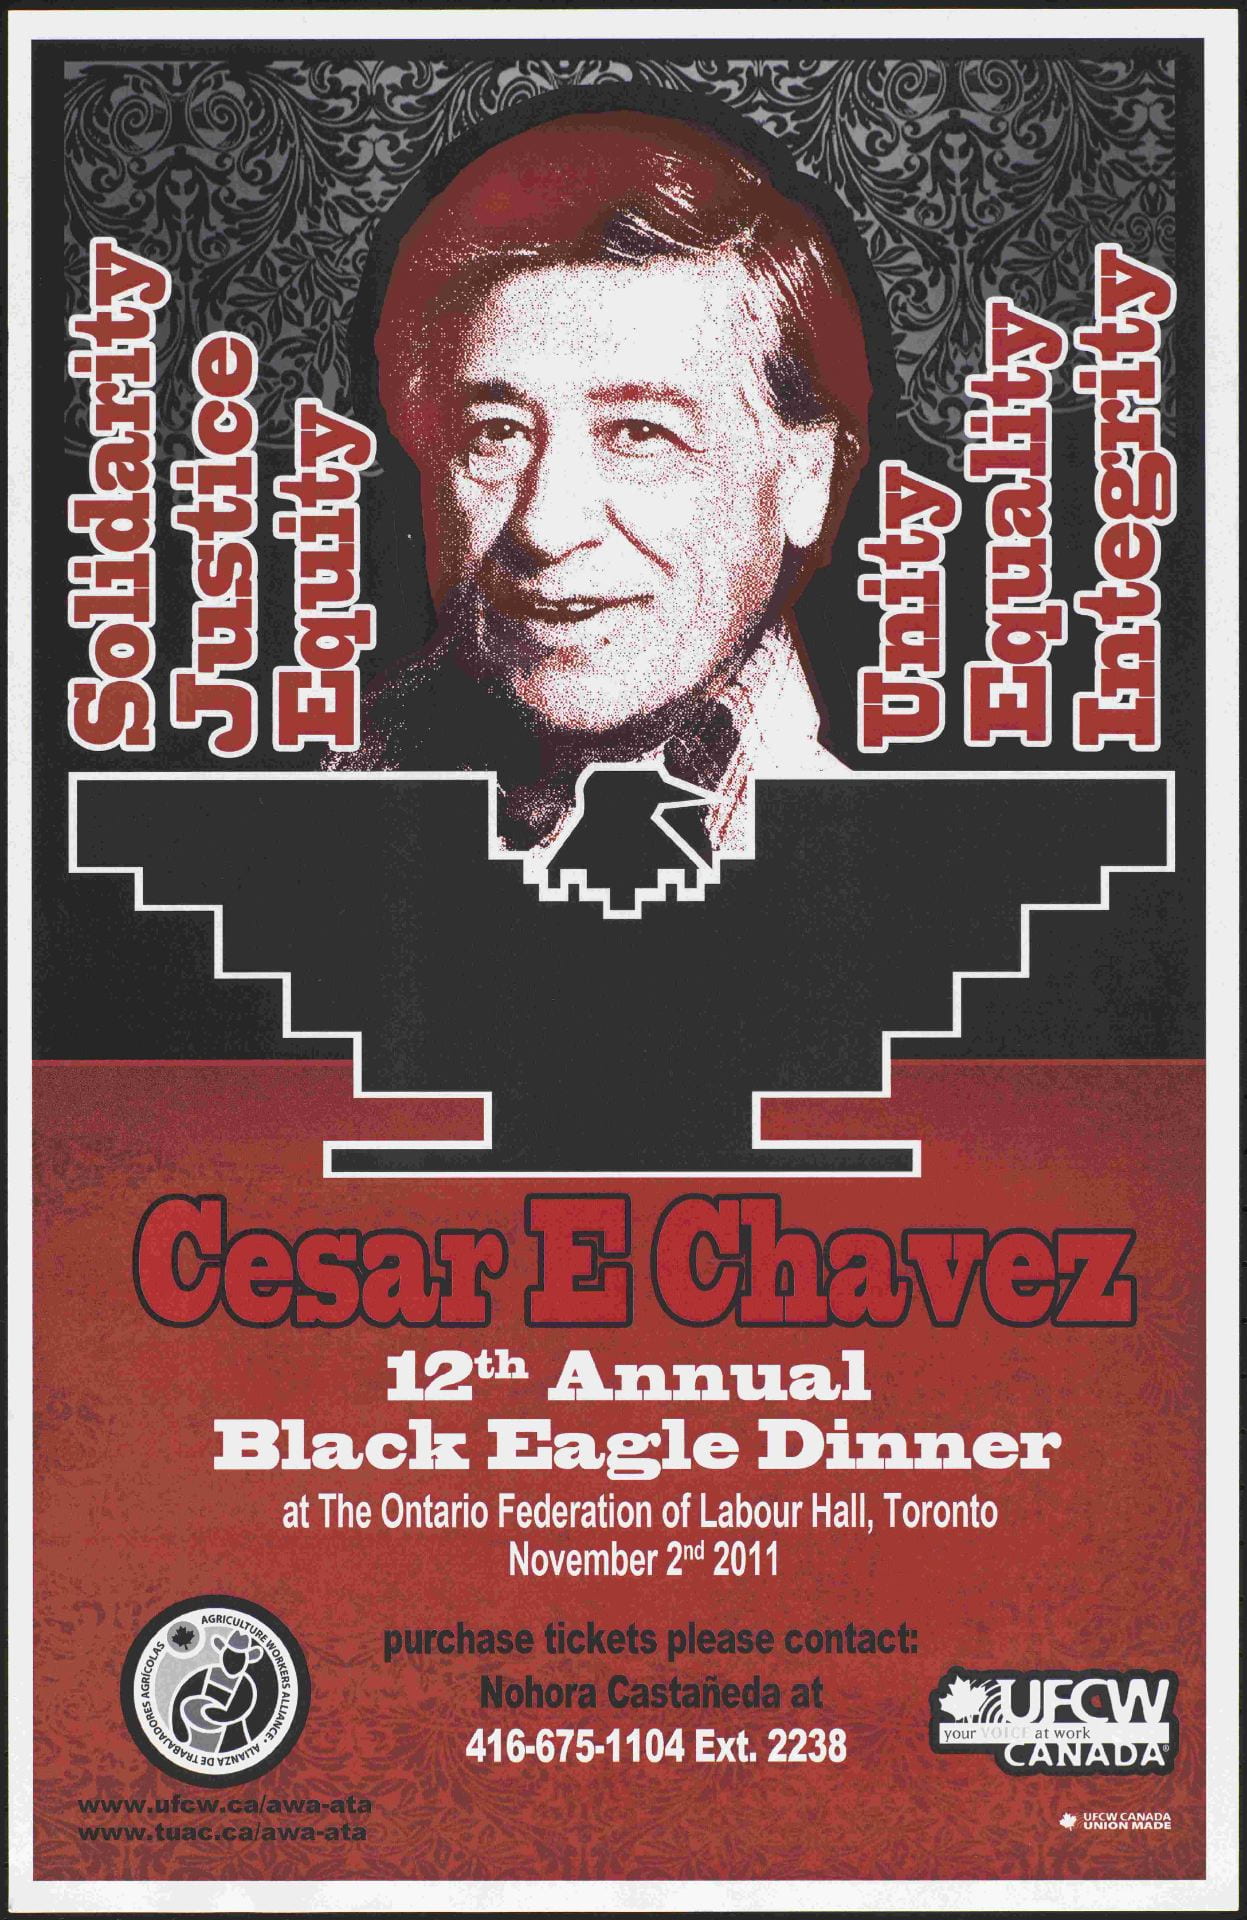 This poster advertises the 12th Annual Black Eagle Dinner.